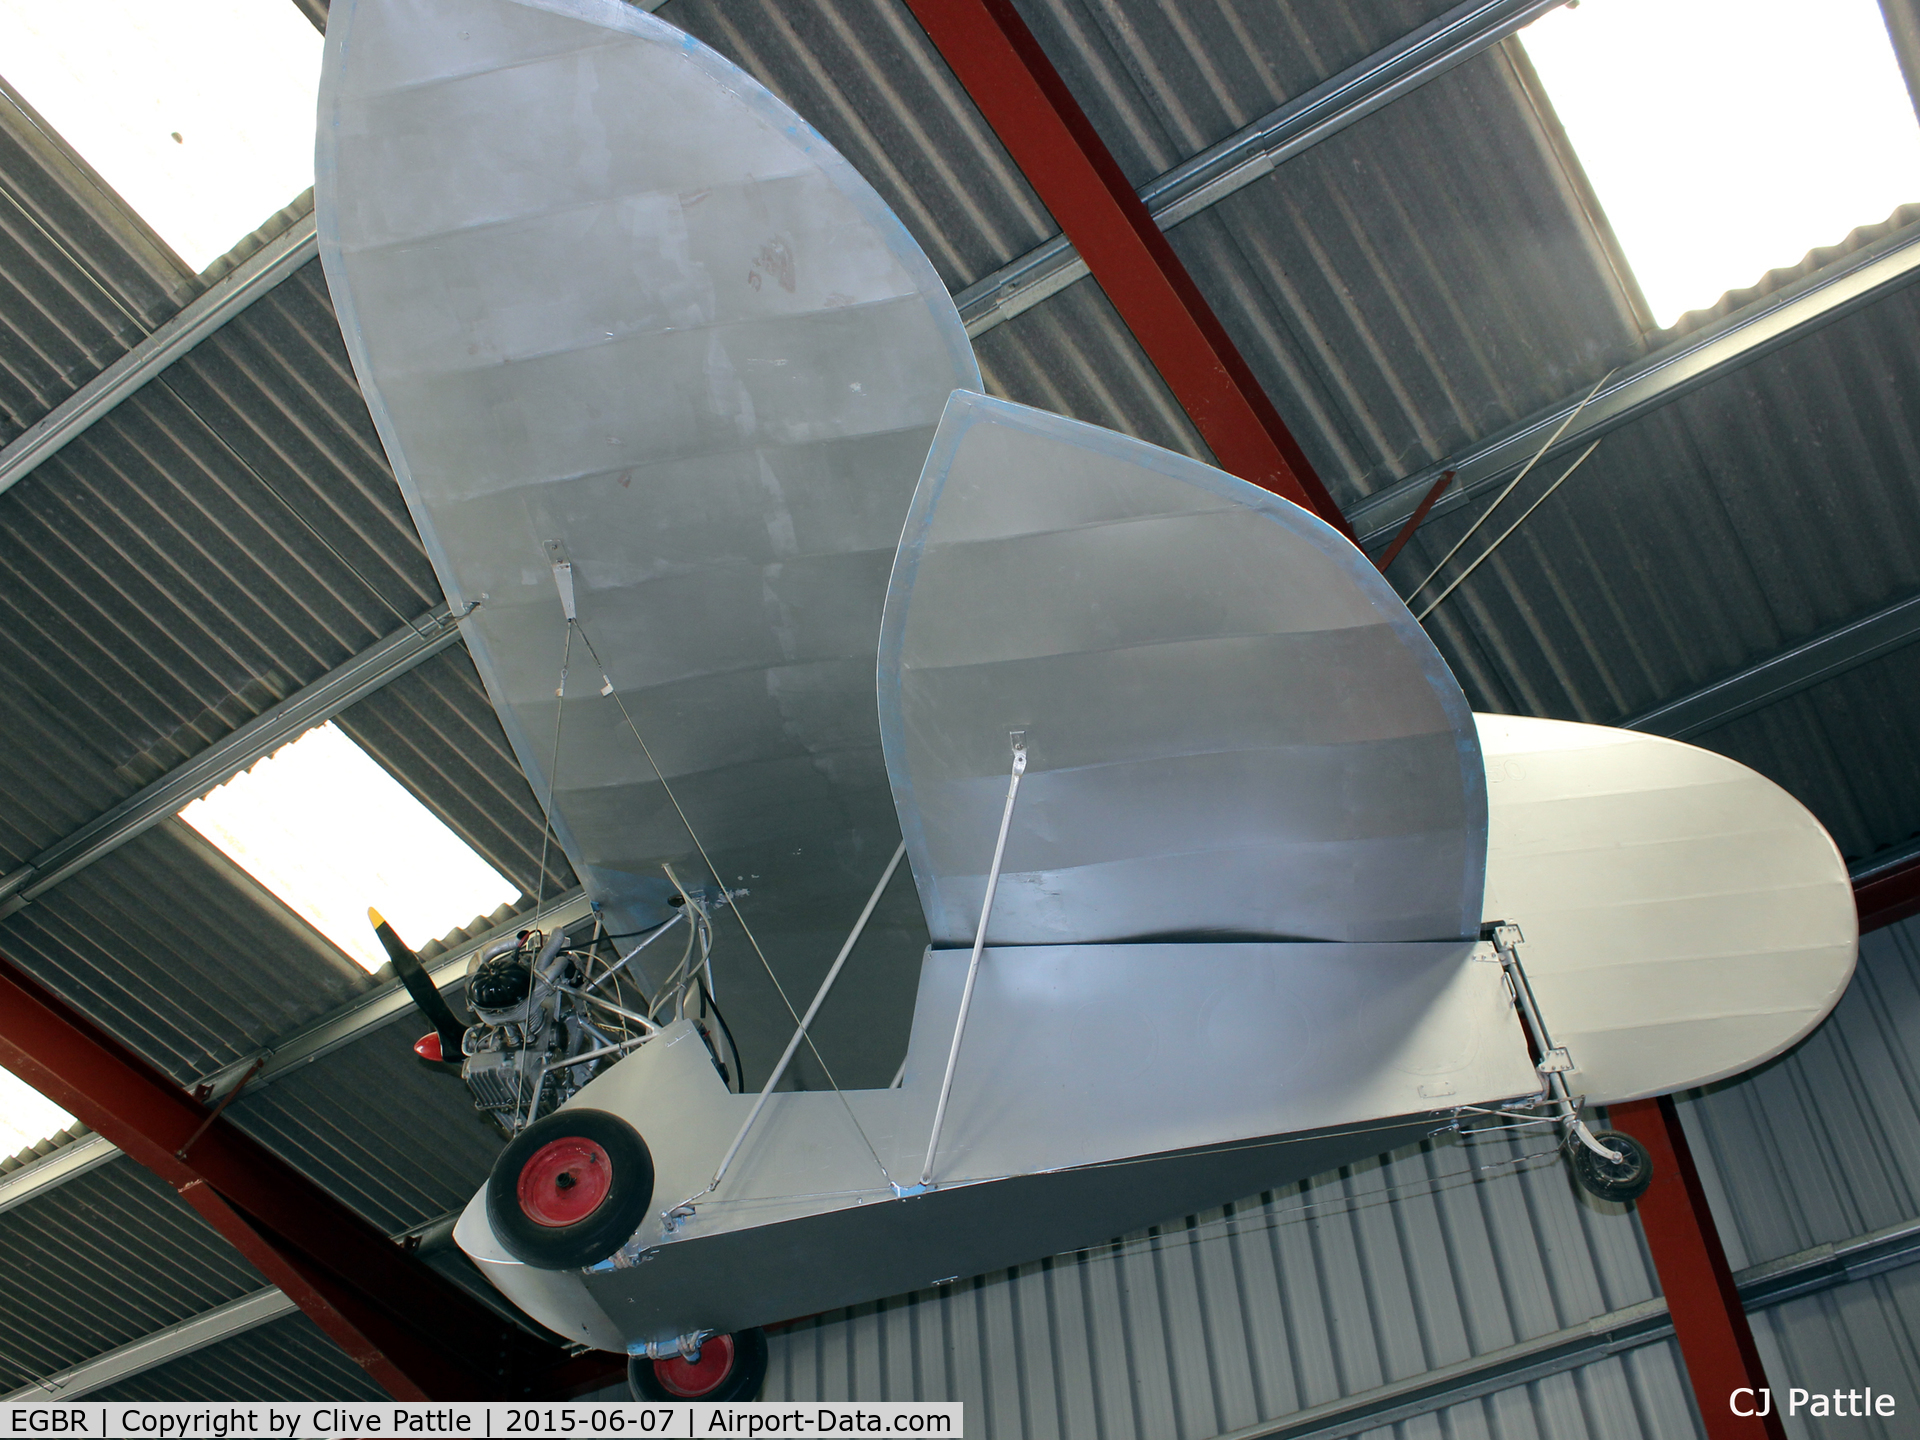 EGBR Airport - A Flying Flea in the hangar rafters at Breighton Airfield, Yorkshire - EGBR